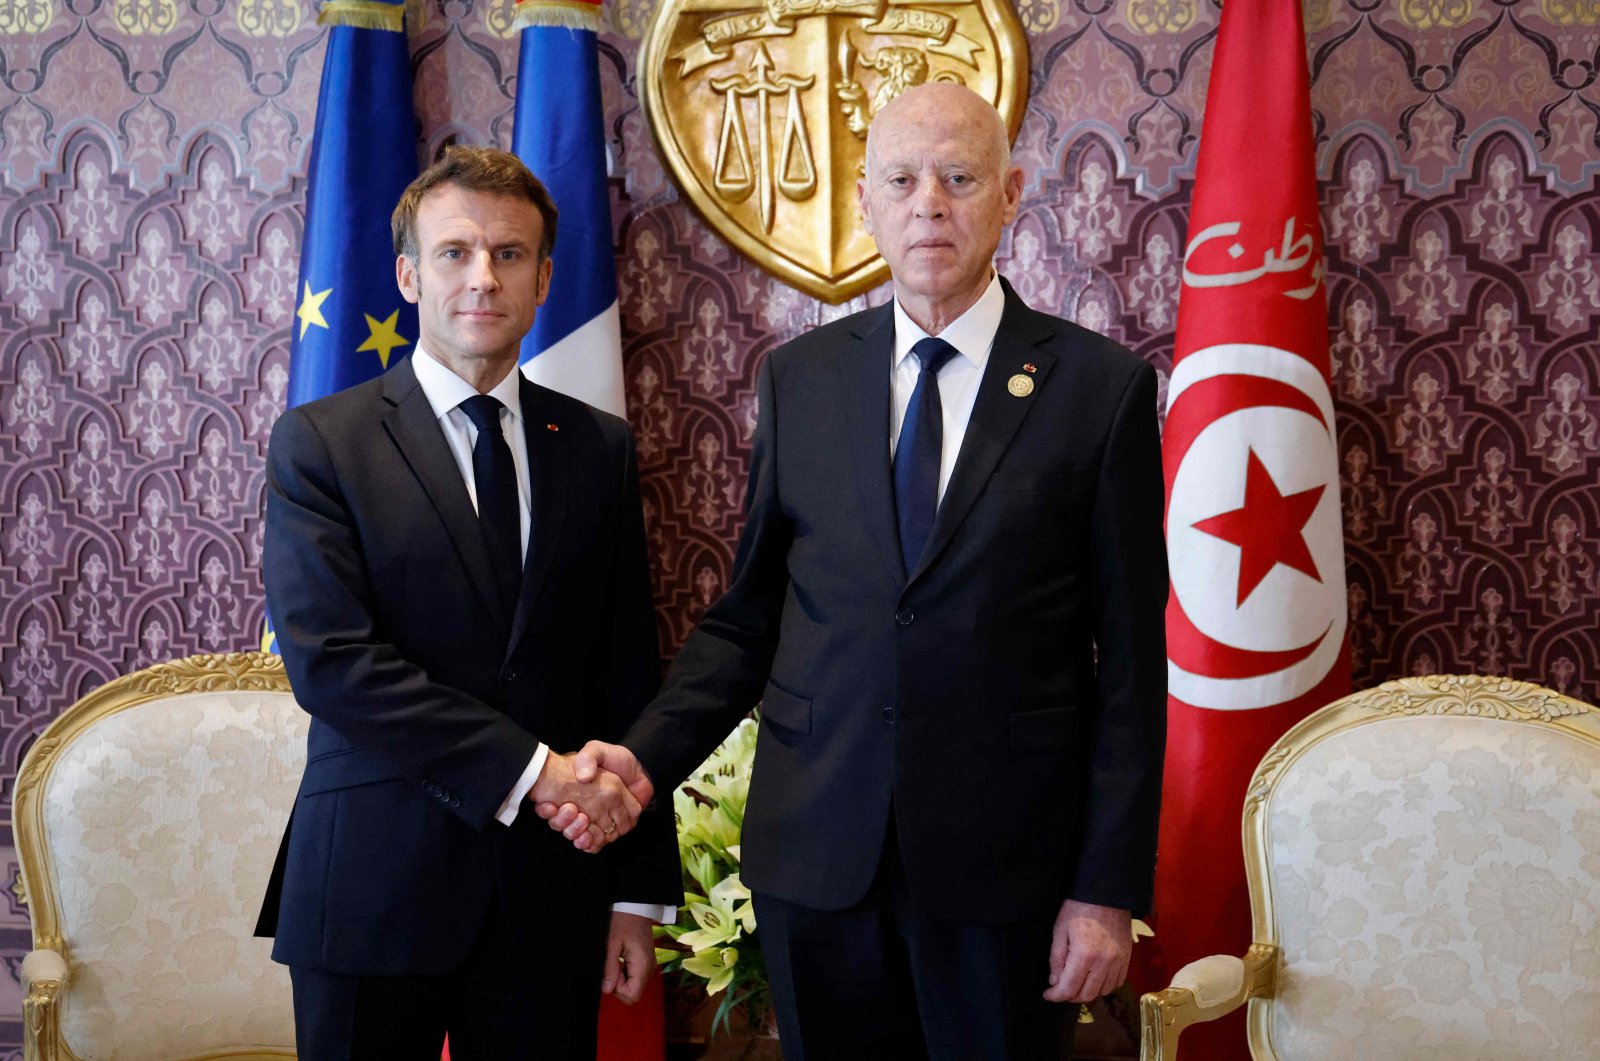 France&#039;s President Emmanuel Macron (L) and Tunisia&#039;s President Kais Saied (R) shake hands before a bilateral meeting during the 18th Francophone countries summit in Djerba, Tunisia, Nov., 19, 2022. (AFP Photo)